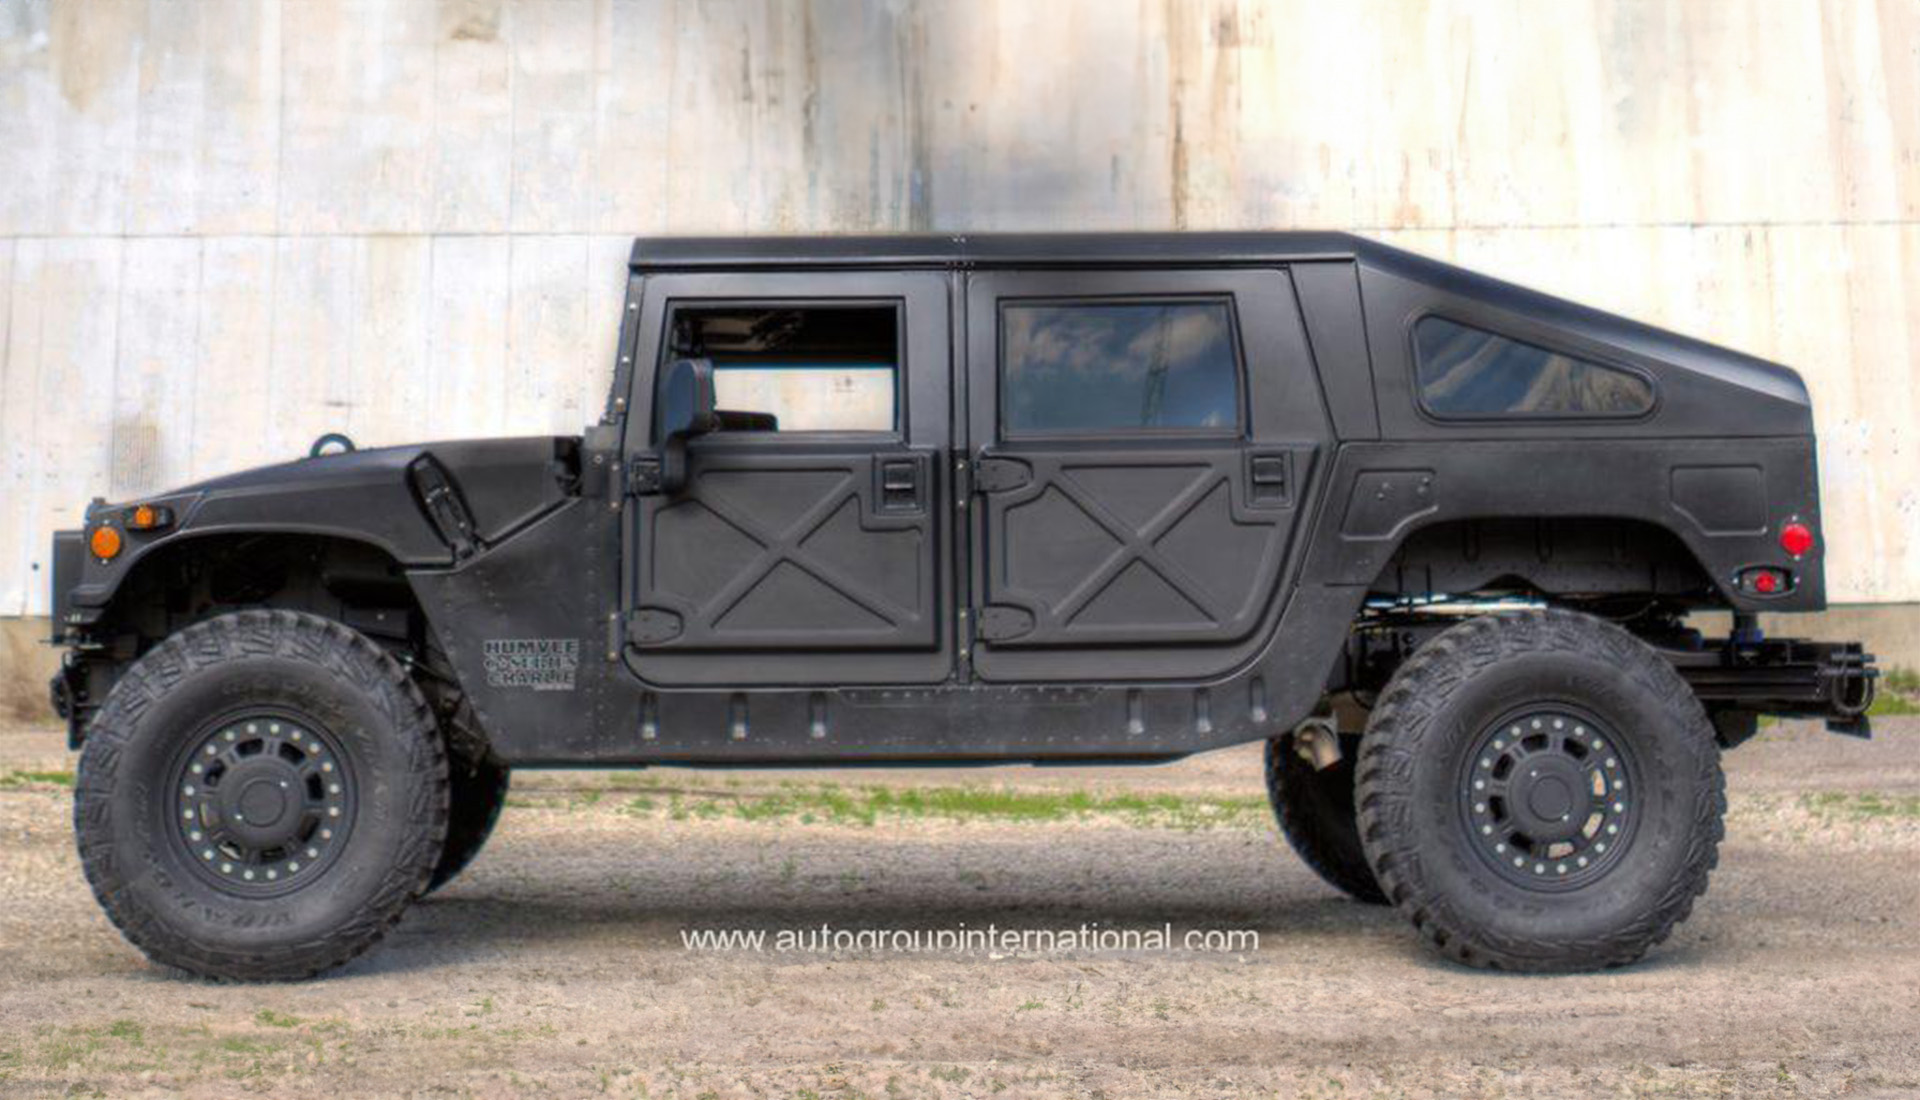 Black armored Humvee vehicle parked against concrete wall.